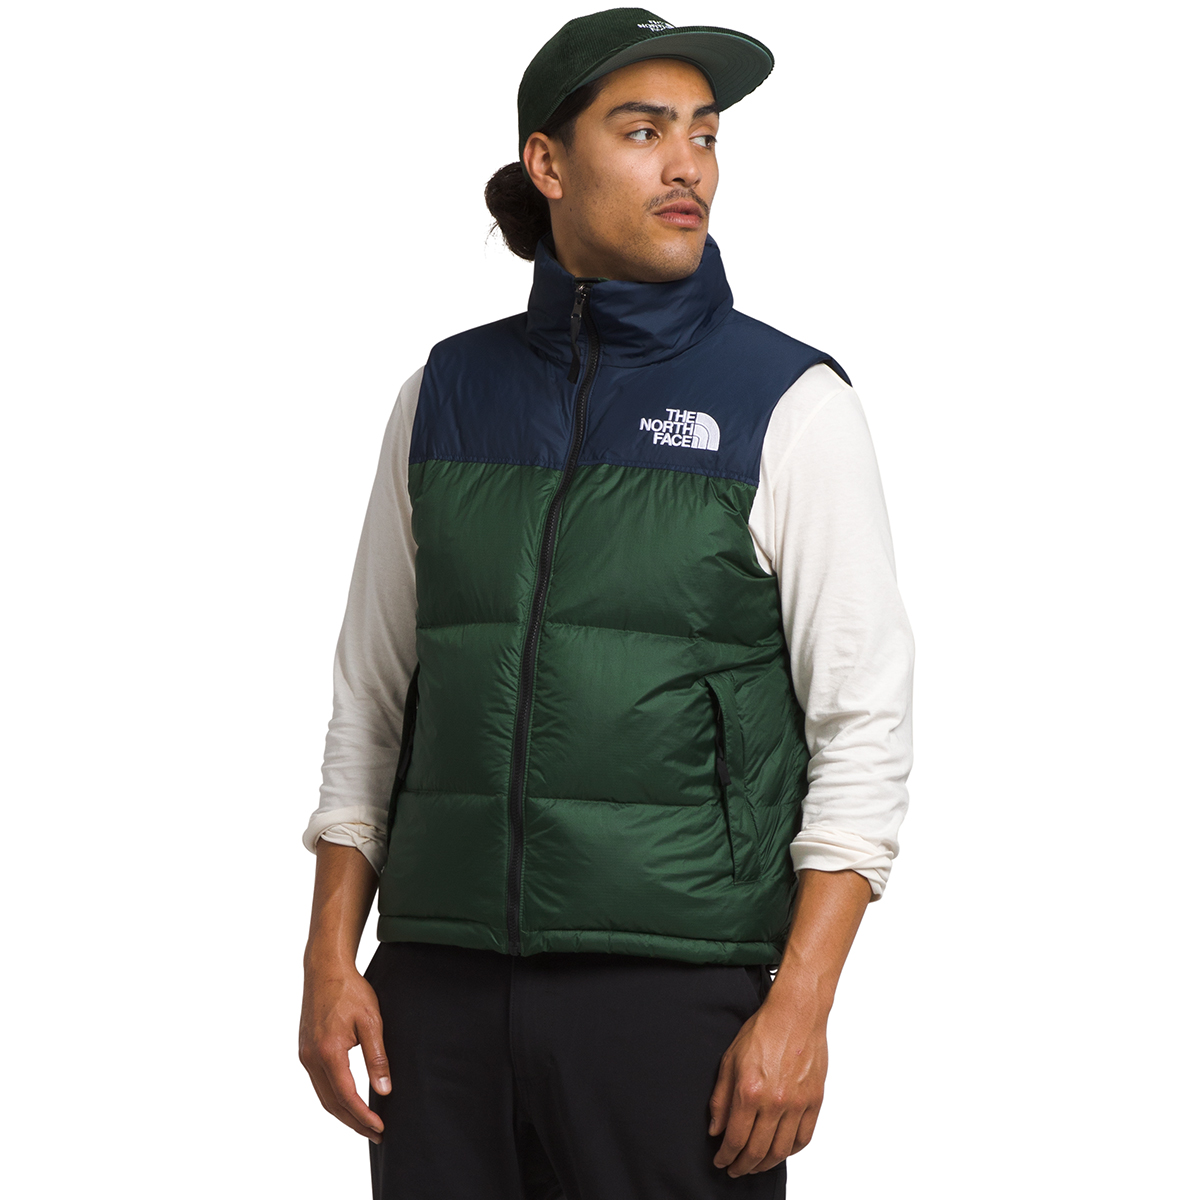 The North Face NF0A3JQQ